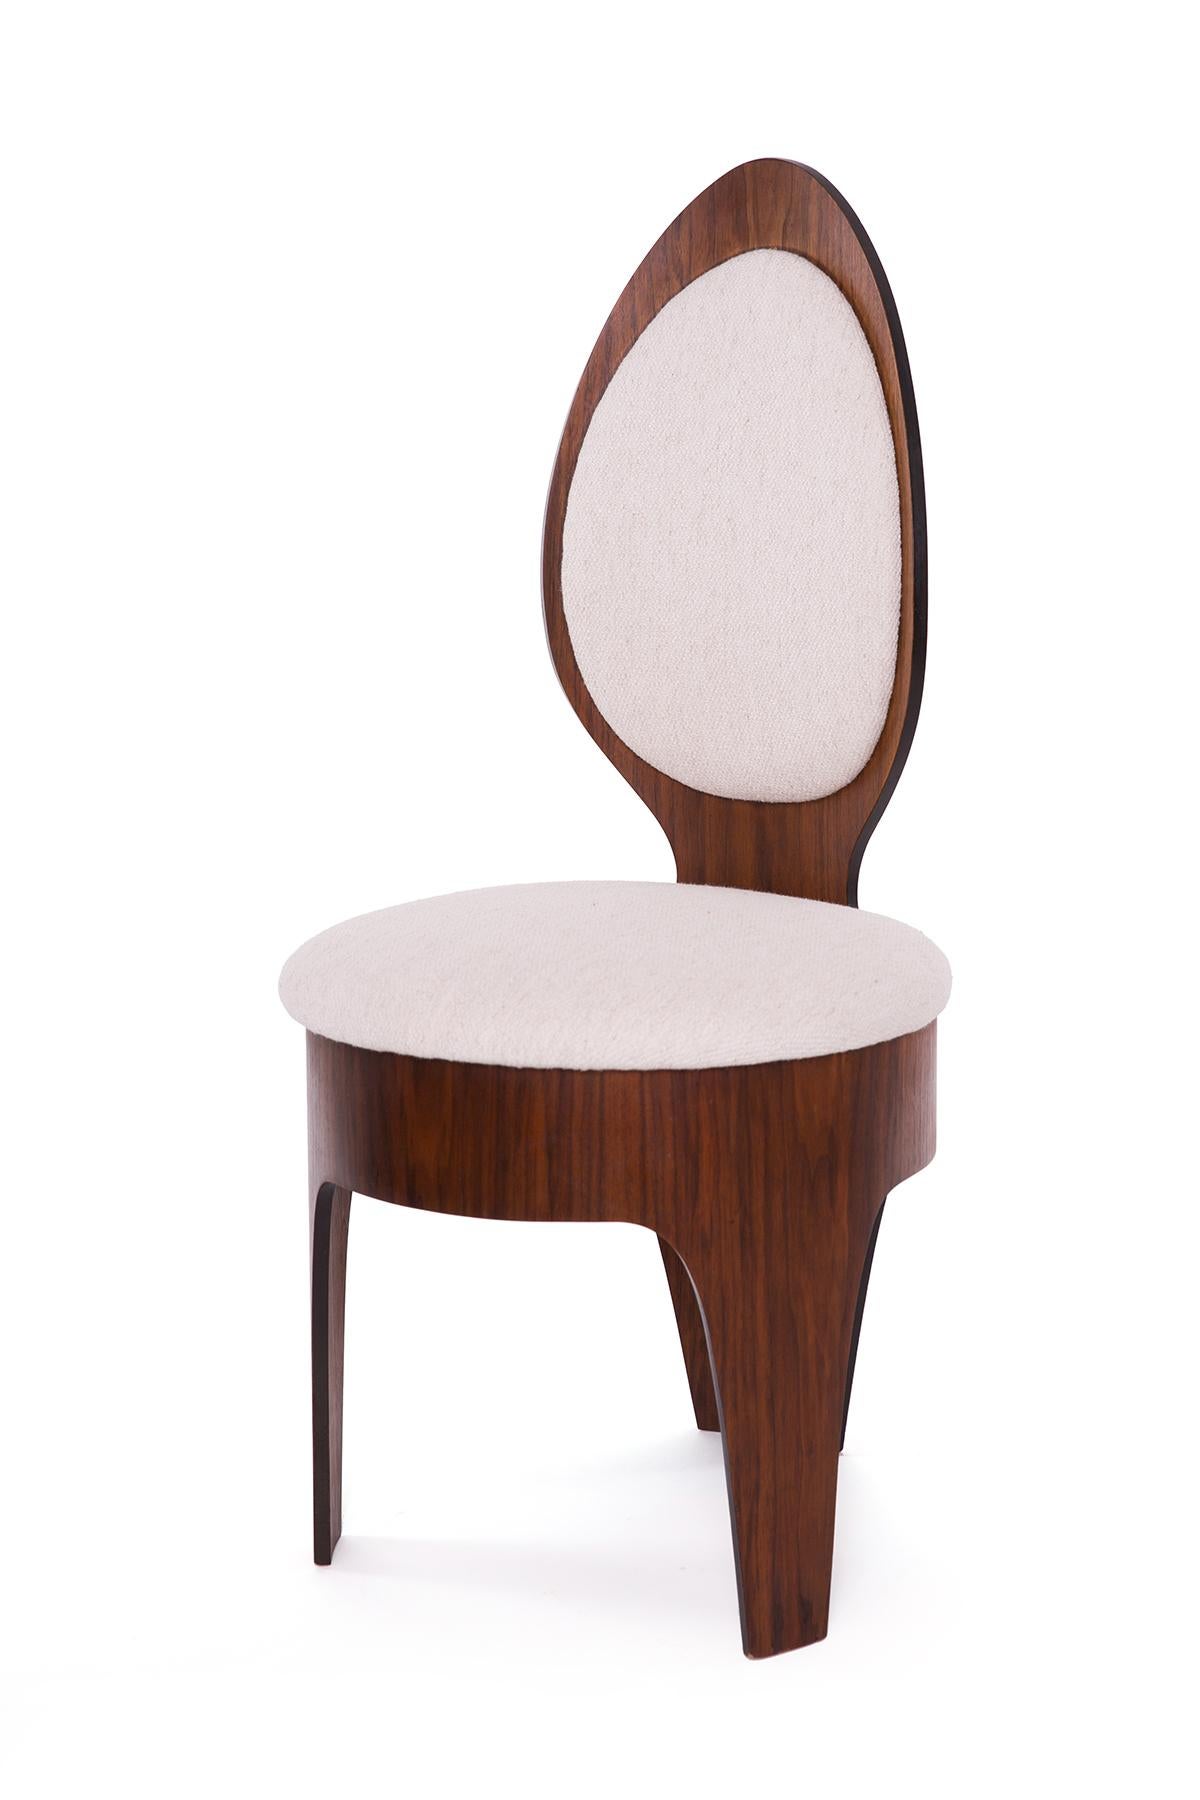 Mid-20th Century Henry Glass Walnut 'Spoon' Dining Chairs